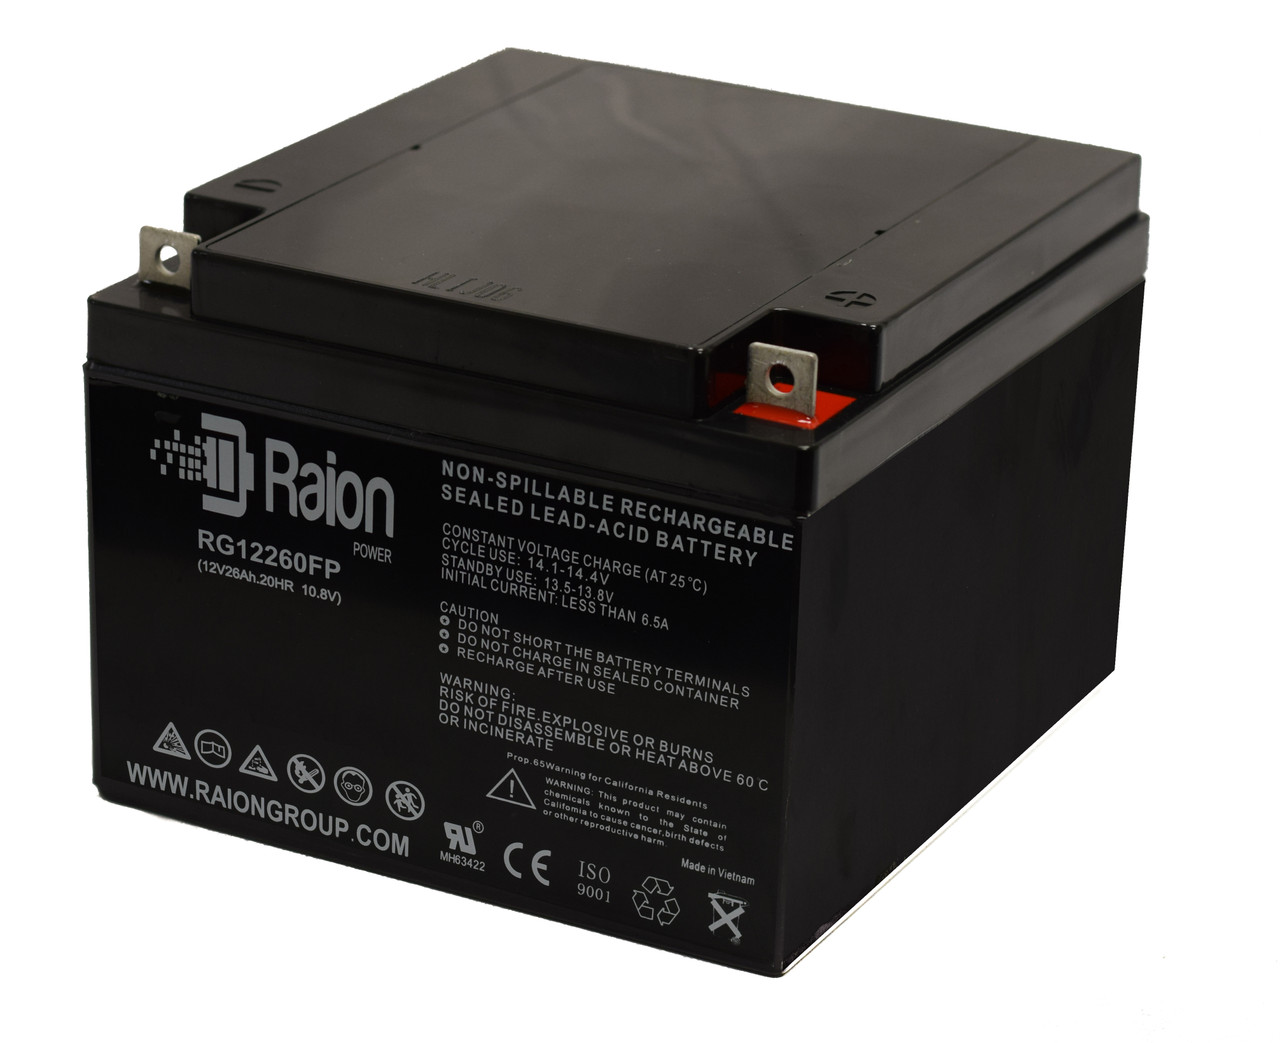 Raion Power Replacement 12V 26Ah Battery for PBQ C 26-12 - 1 Pack